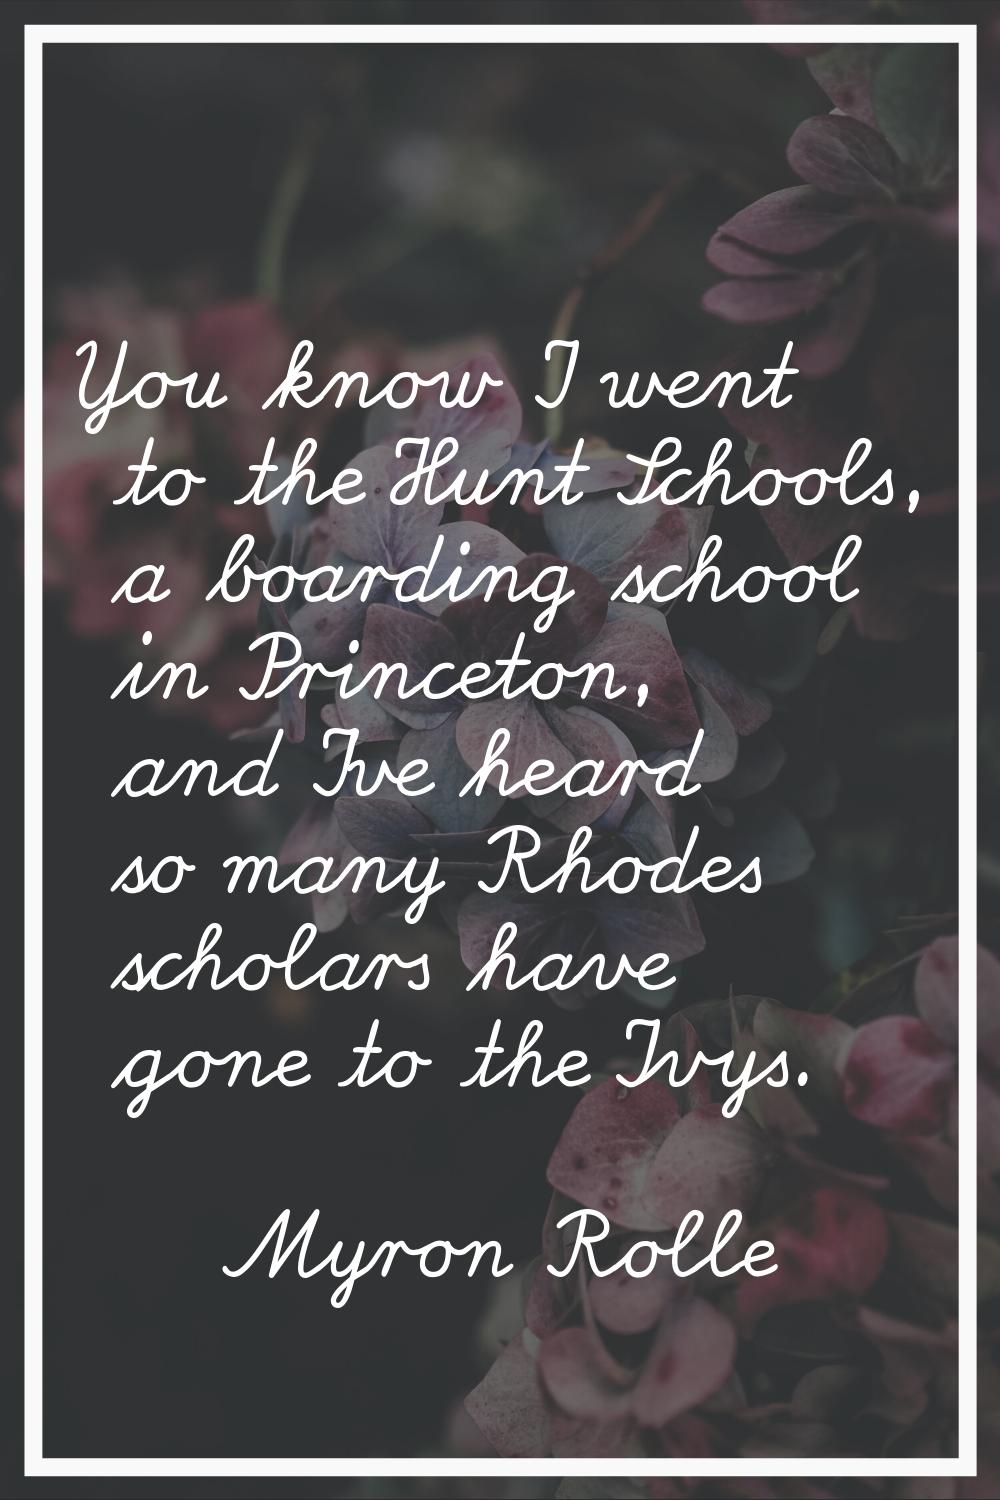 You know I went to the Hunt Schools, a boarding school in Princeton, and I've heard so many Rhodes 